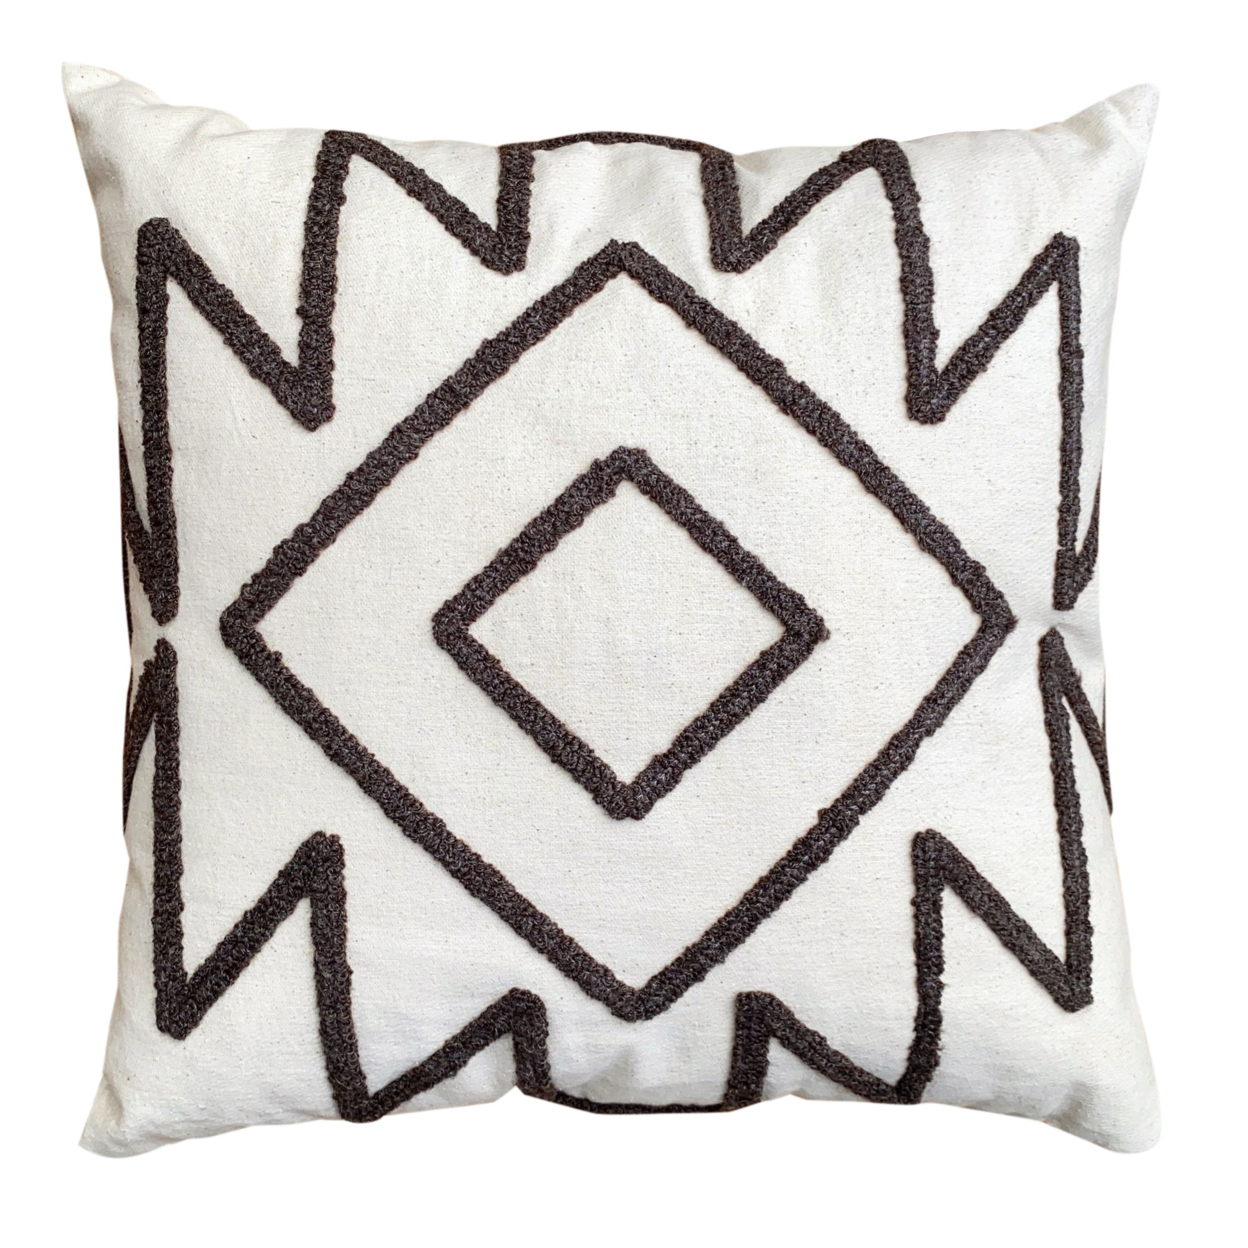 17 x 17 Inch Square Cotton Accent Throw Pillows Geometric Aztec Embroidery Set of 2 White Gray - Saltoro Sherpi - image 2 of 7